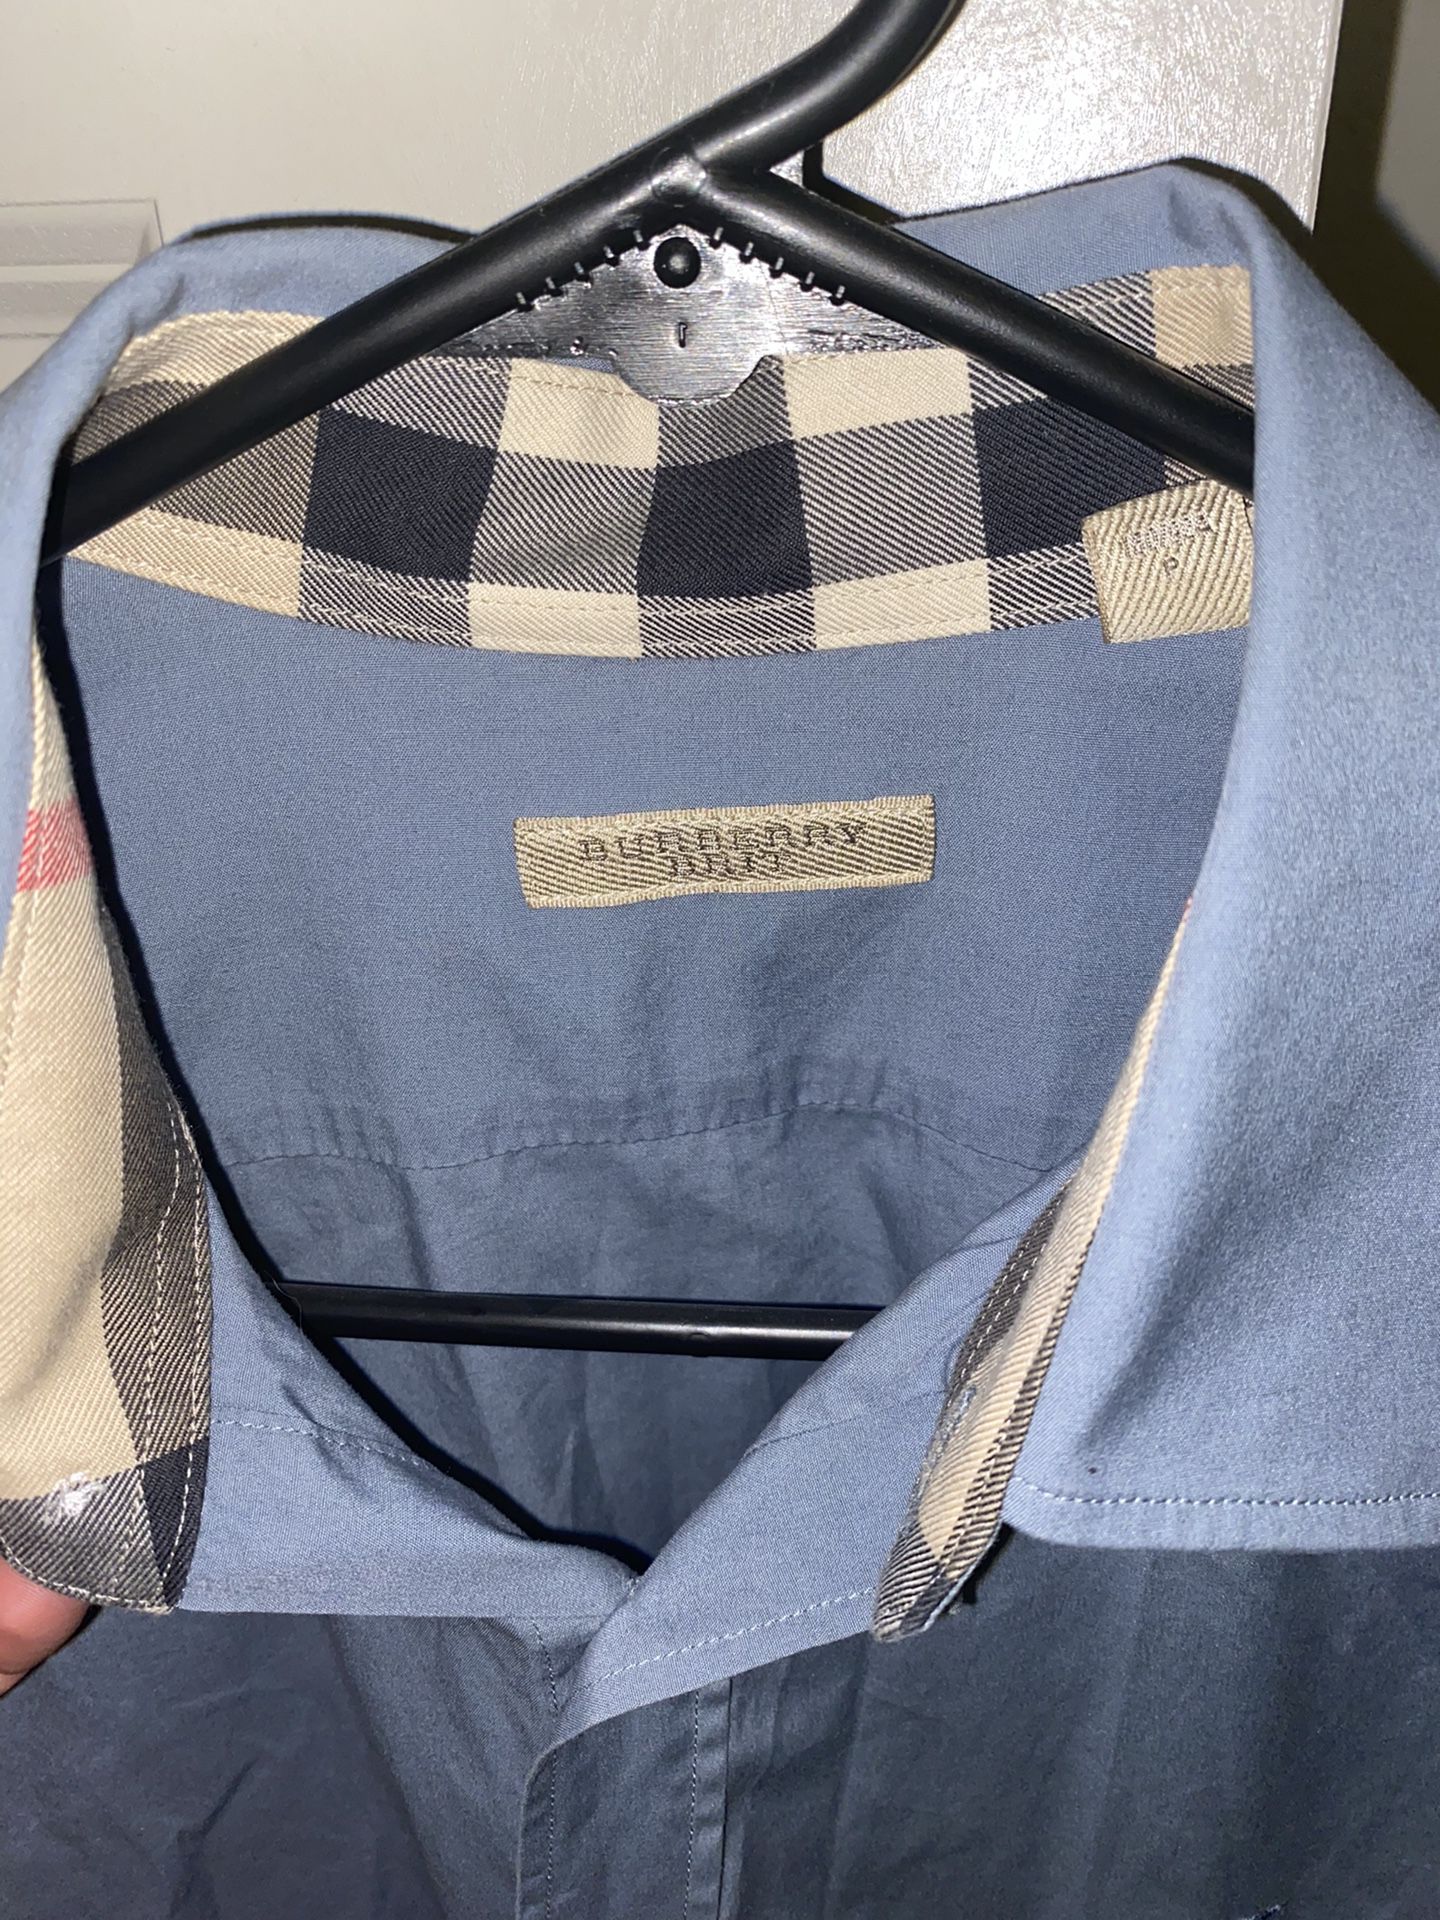 Men’s Burberry button up size is small, amazing condition